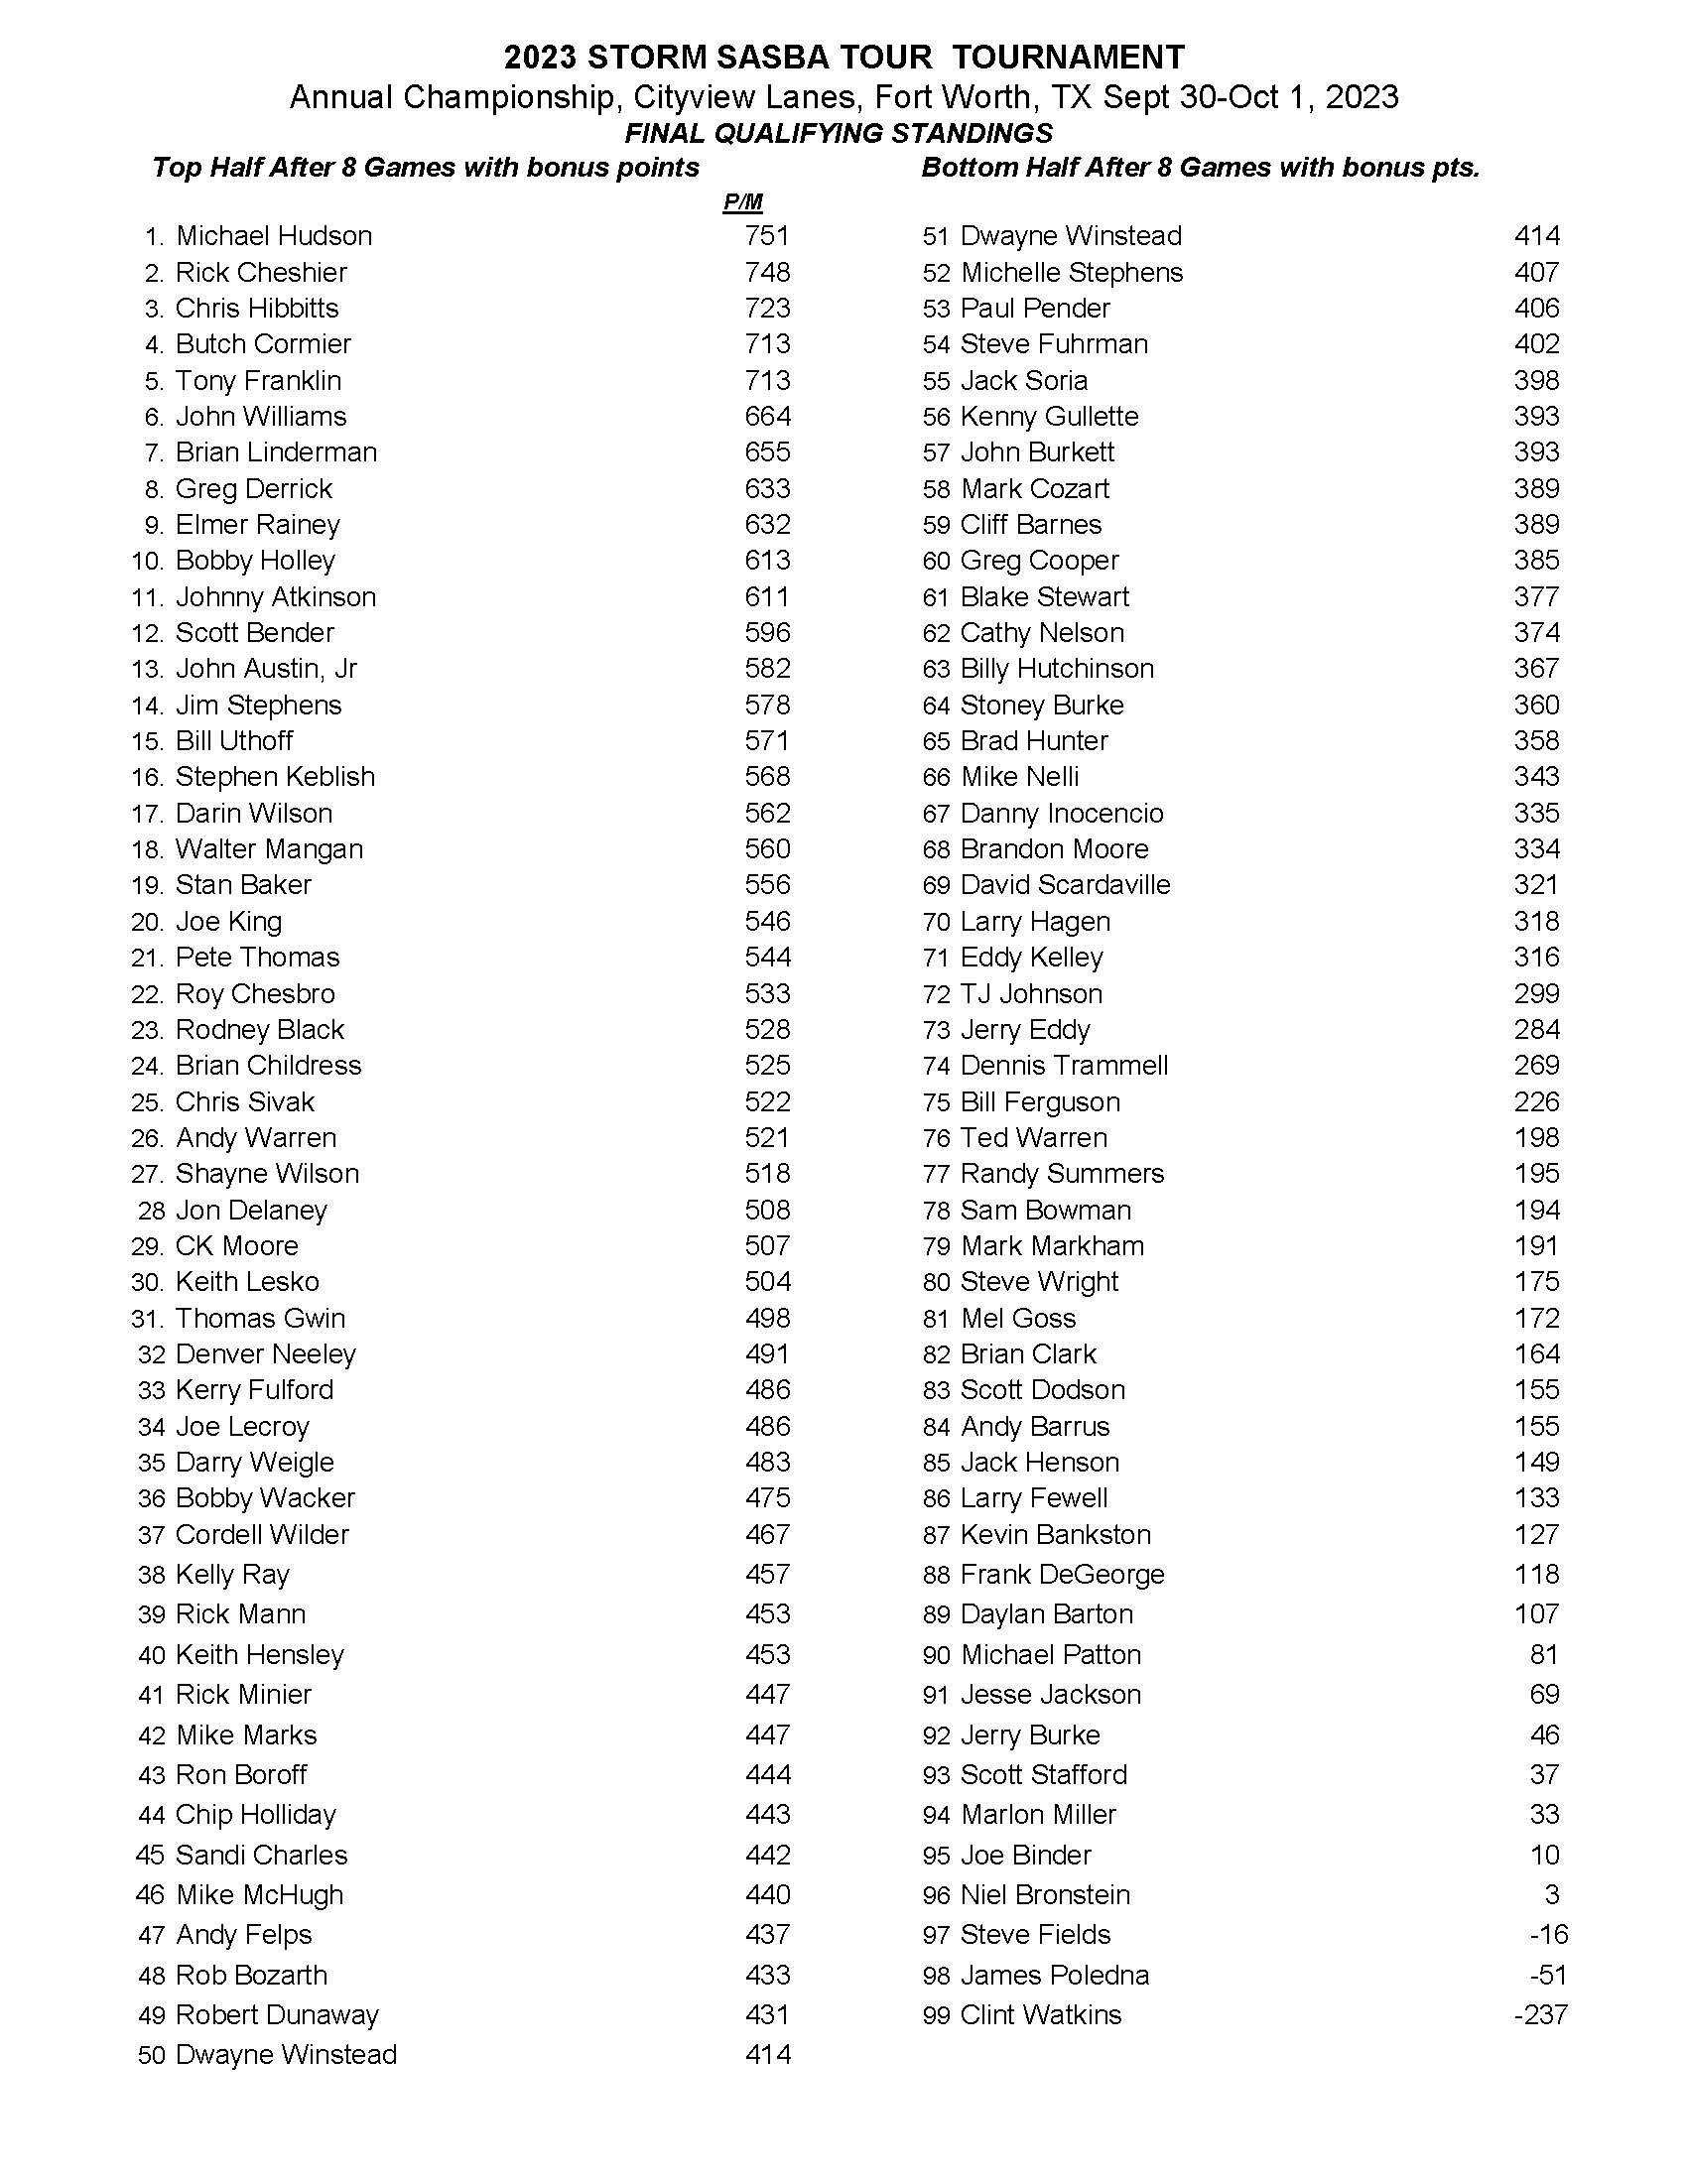 10012023results_Page_2